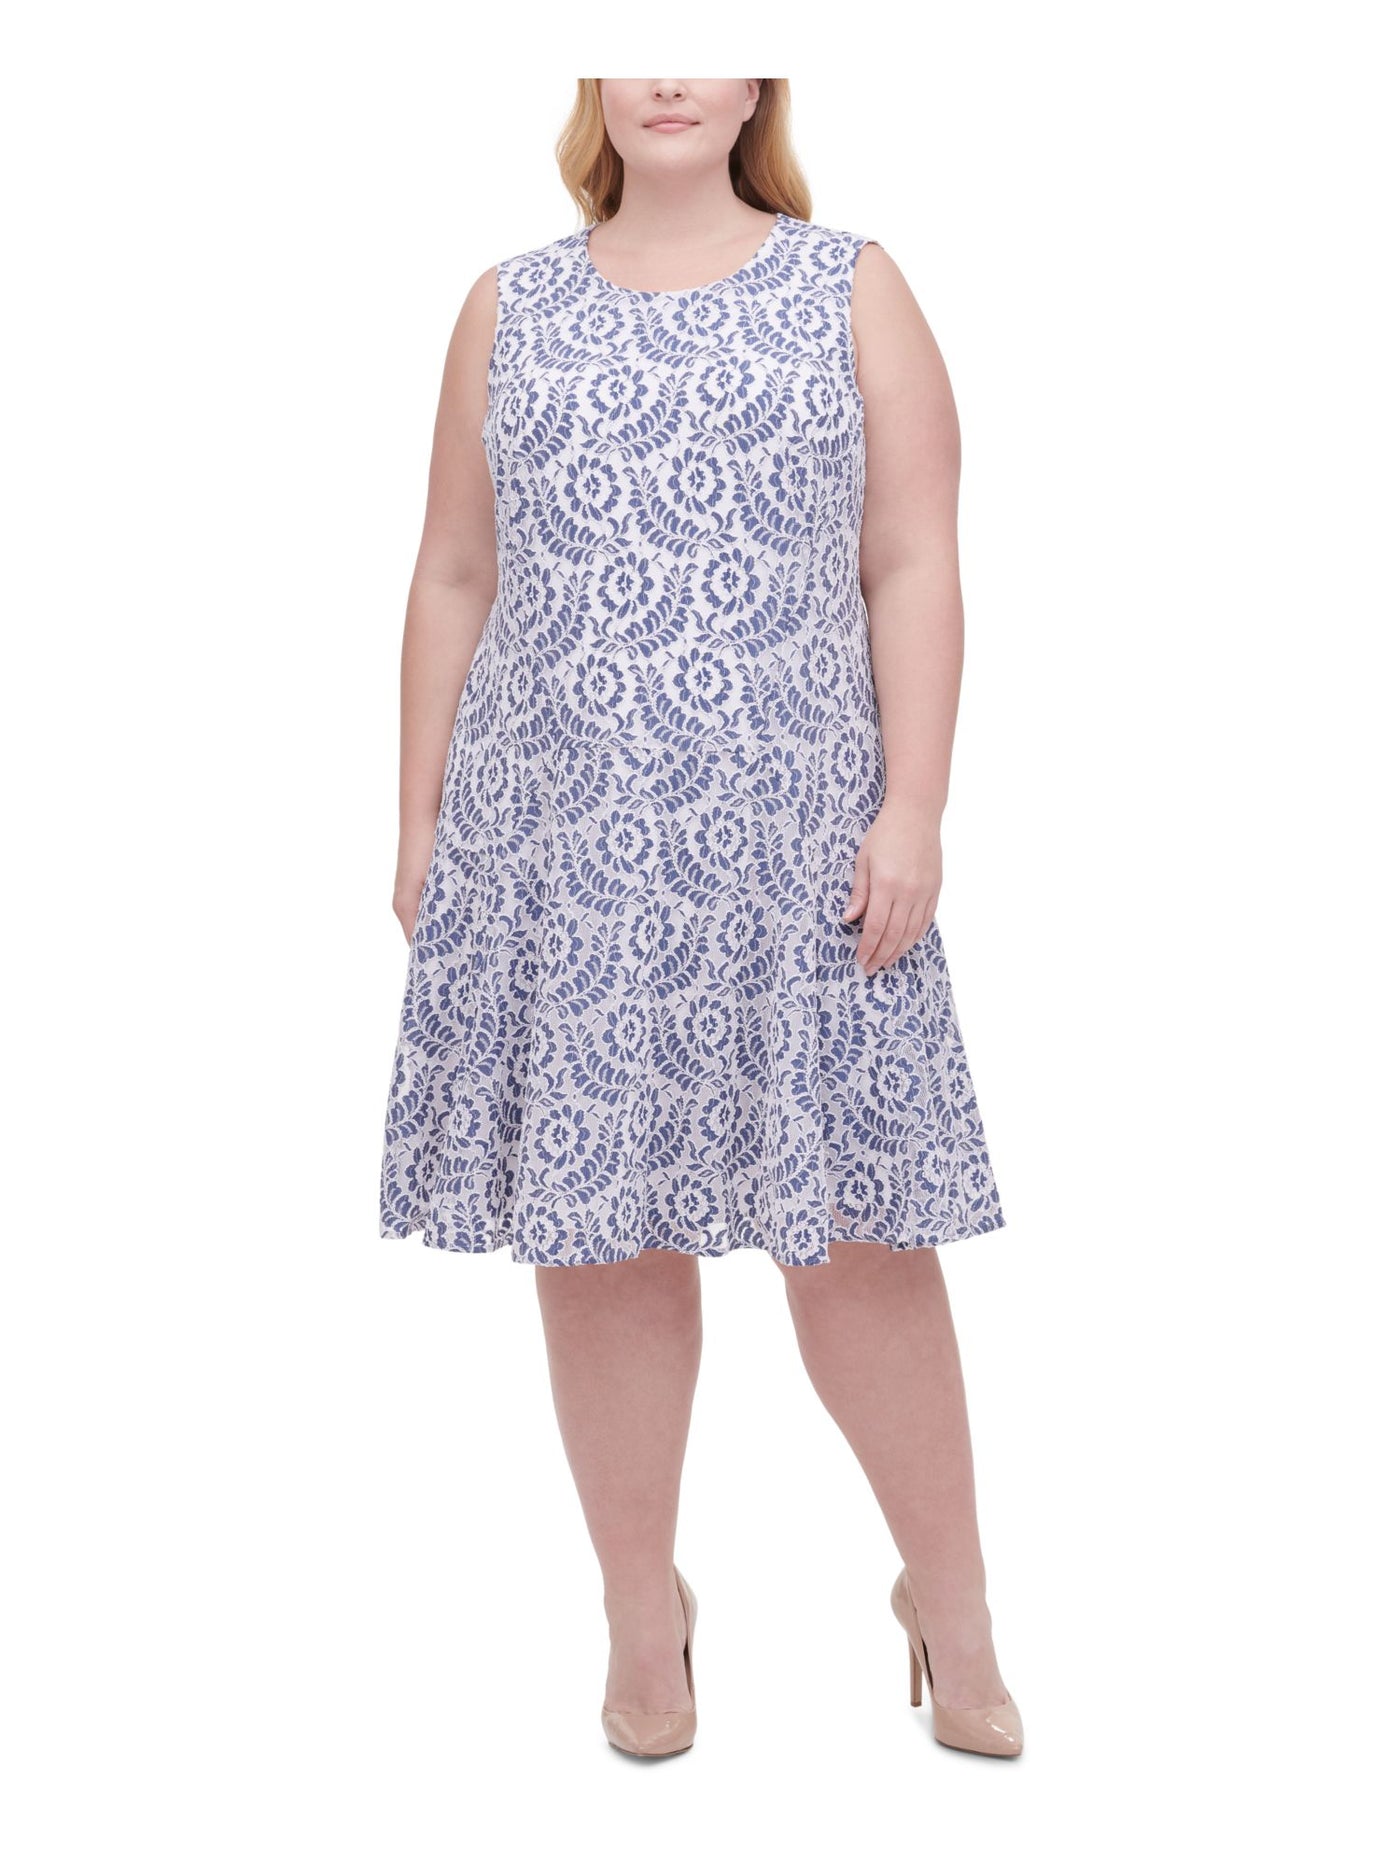 TOMMY HILFIGER Womens Blue Lace Zippered Printed Sleeveless Crew Neck Knee Length Cocktail Fit + Flare Dress Plus 18W